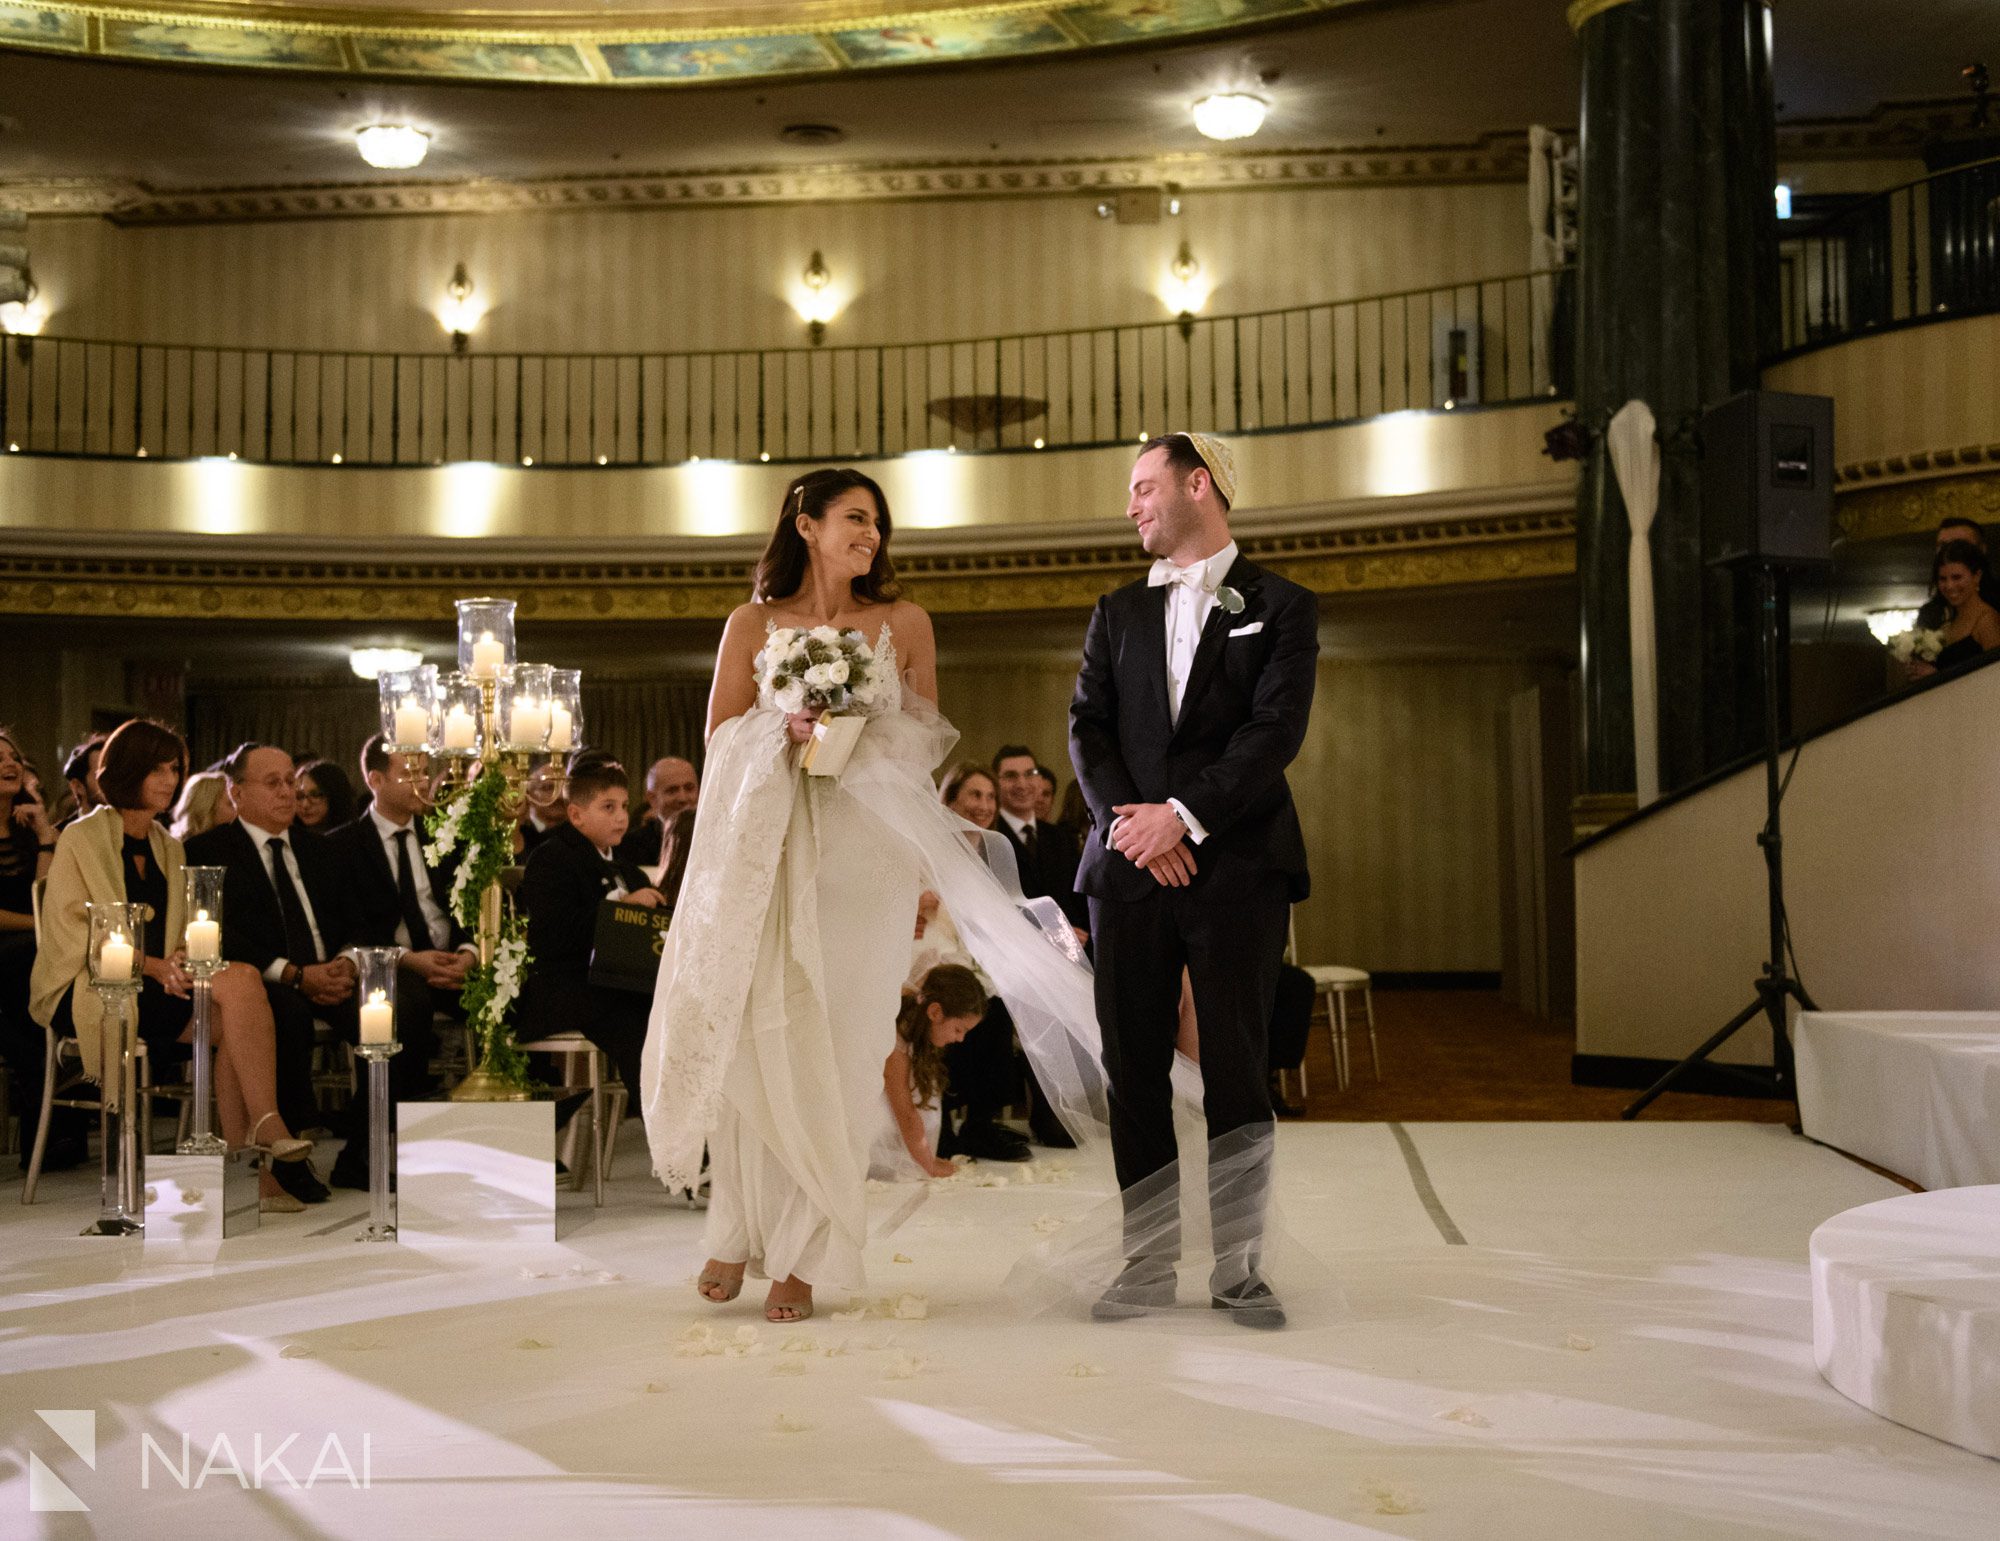 intercontinental magnificent mile ceremony wedding pictures grand ballroom